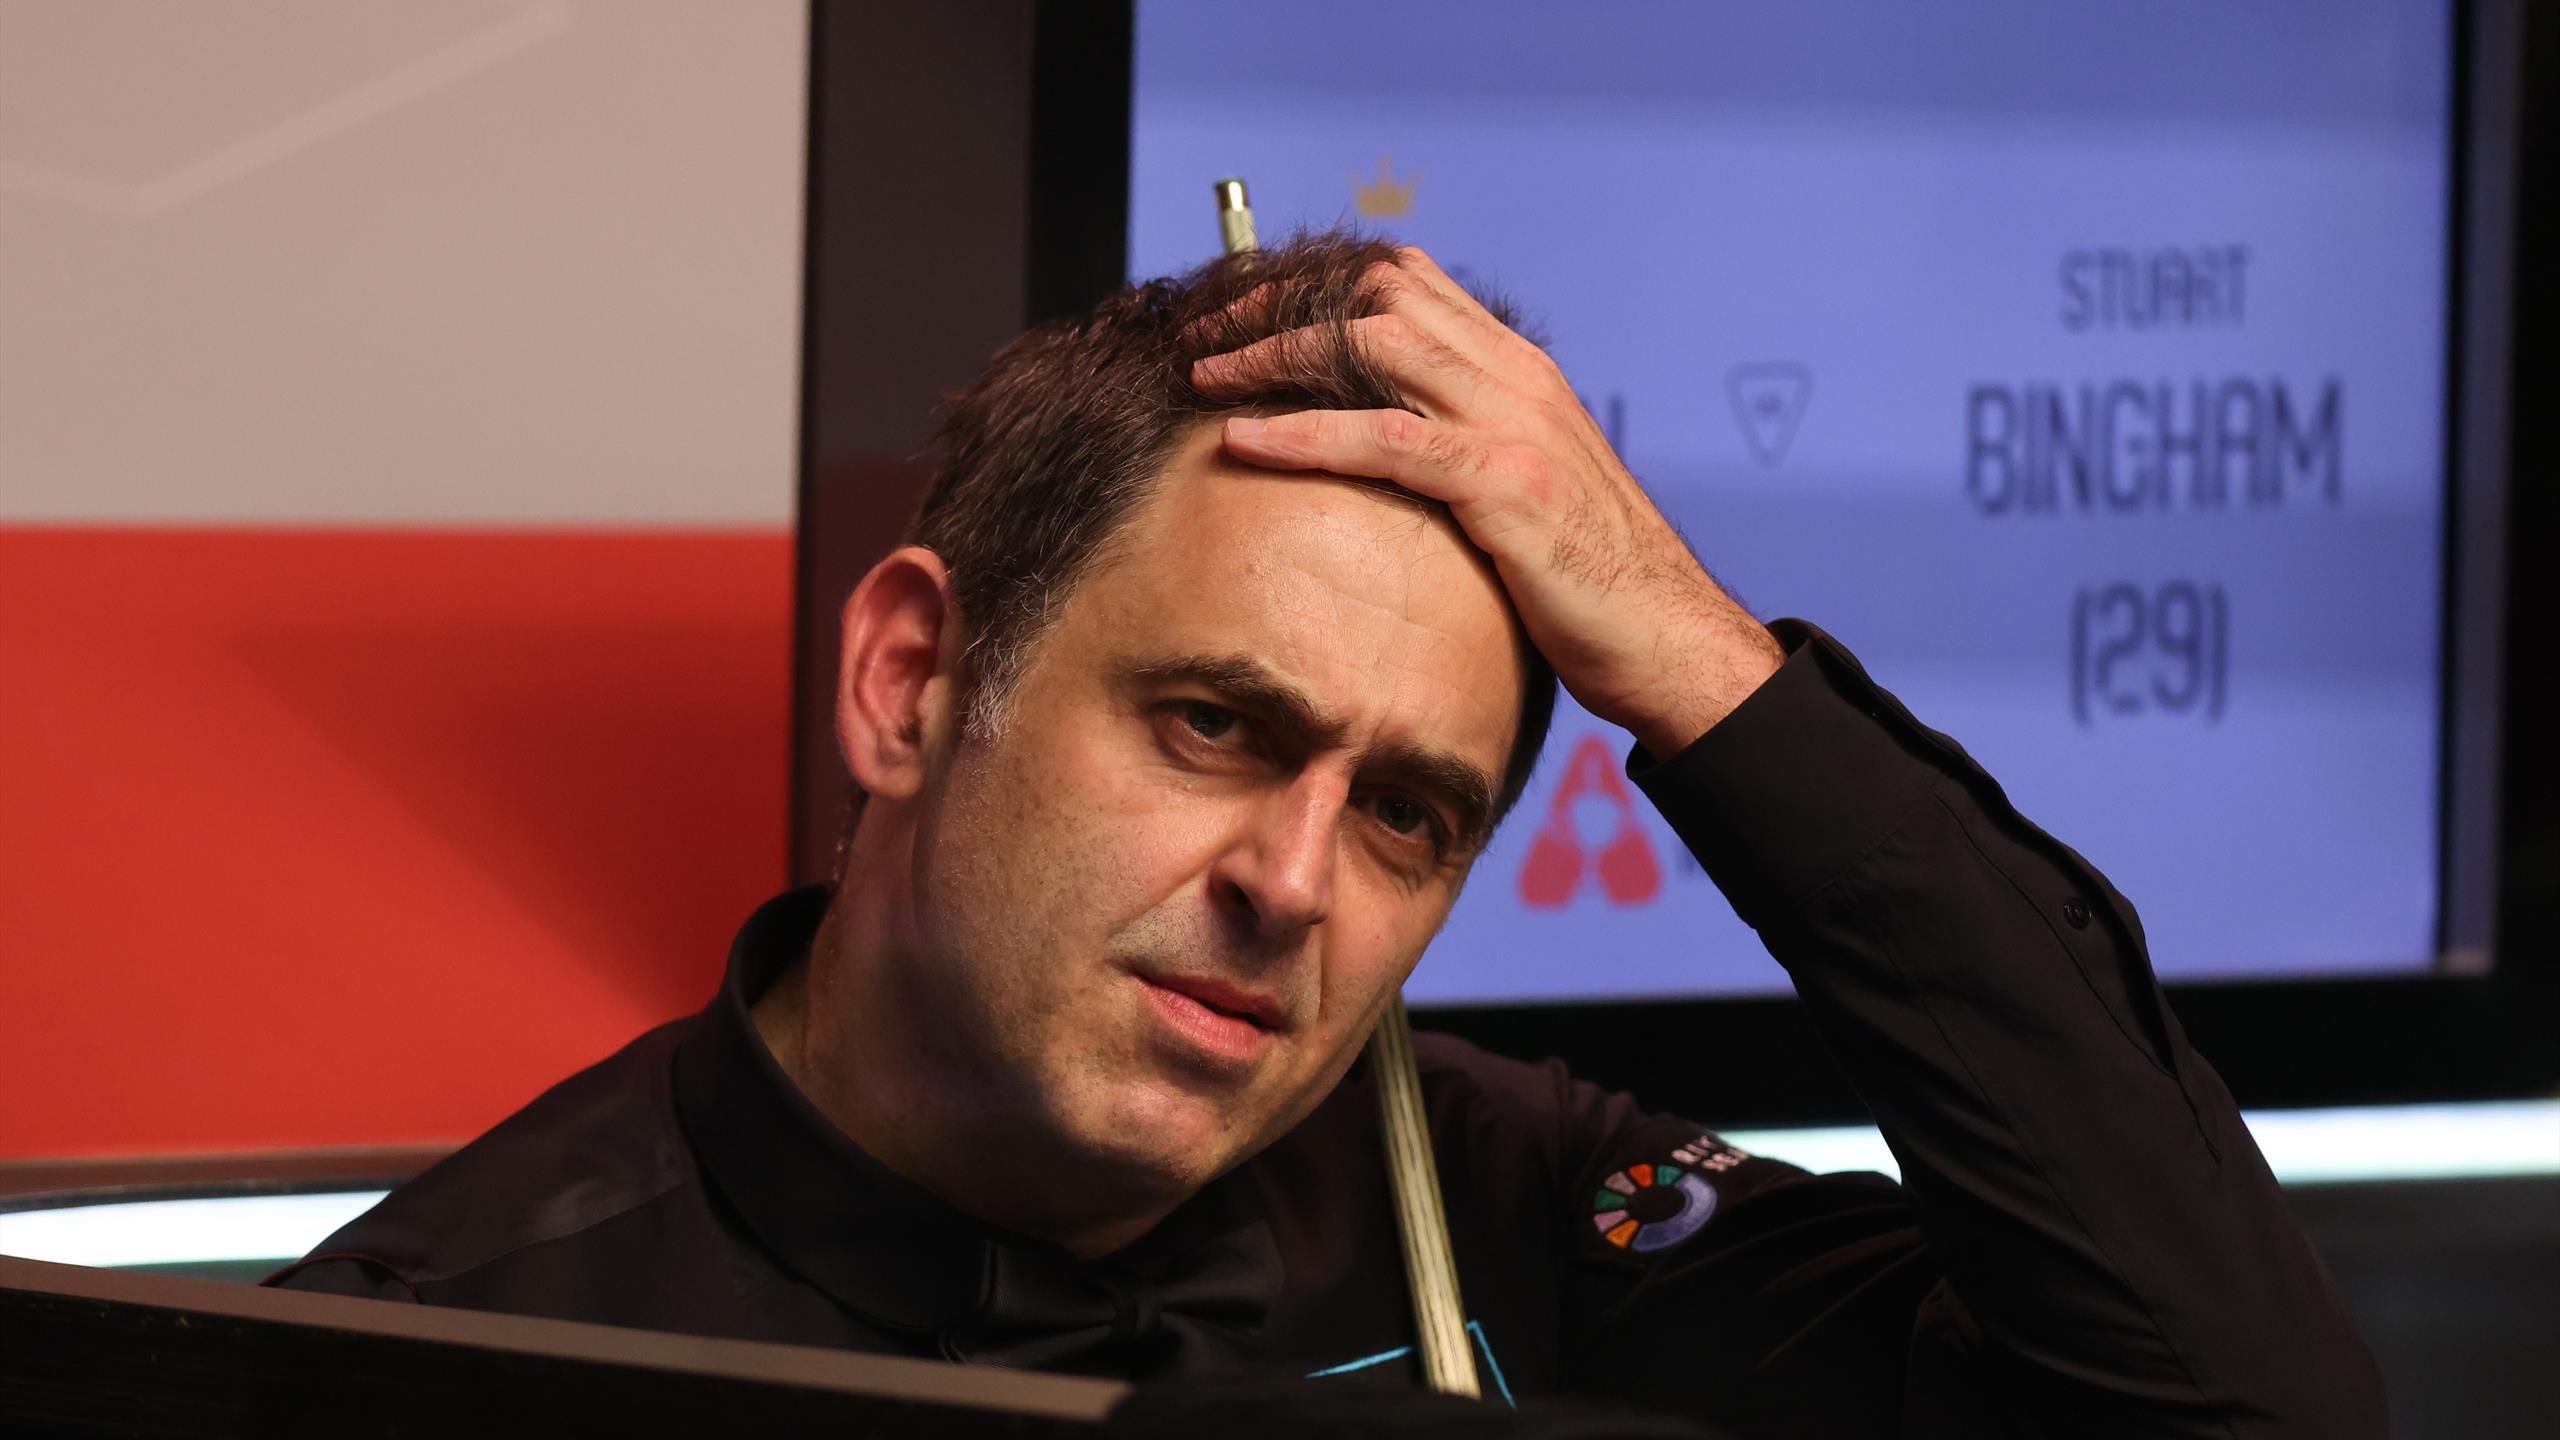 Ronnie O’Sullivan proposes a modern makeover for the Crucible at World Snooker Championship